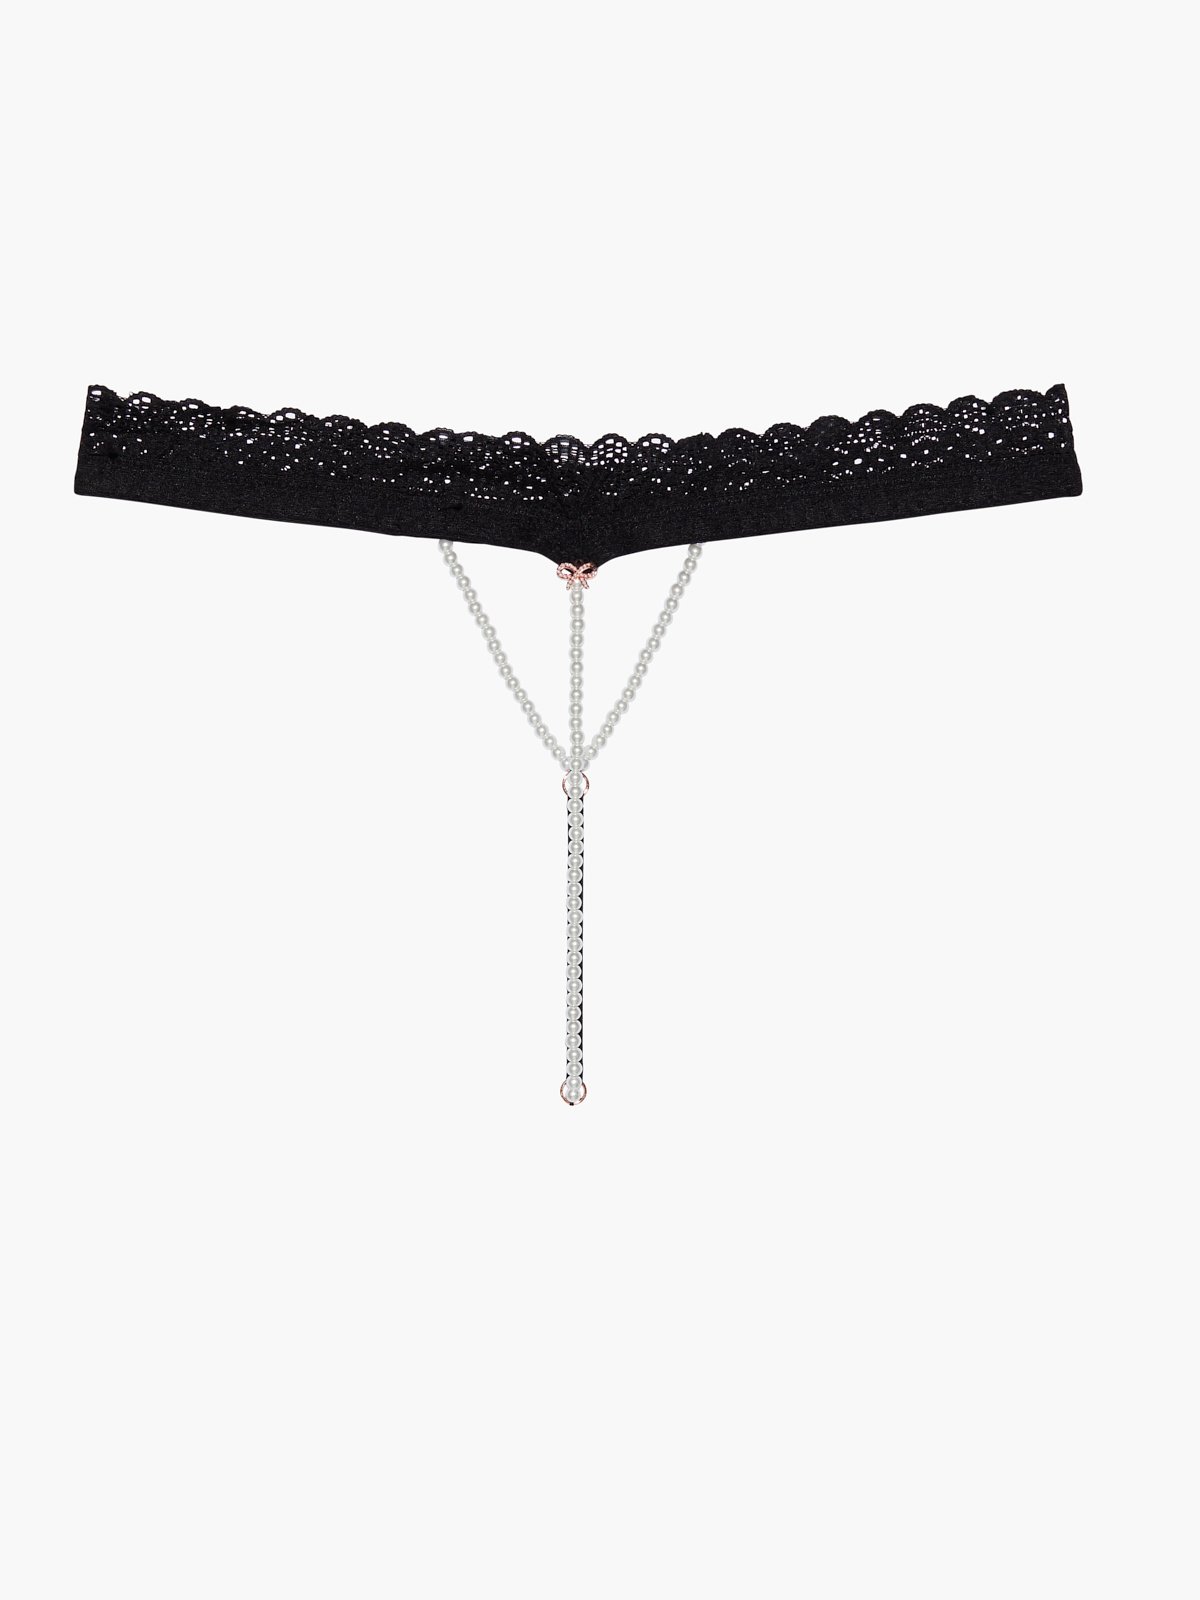 String of Pearls Thong